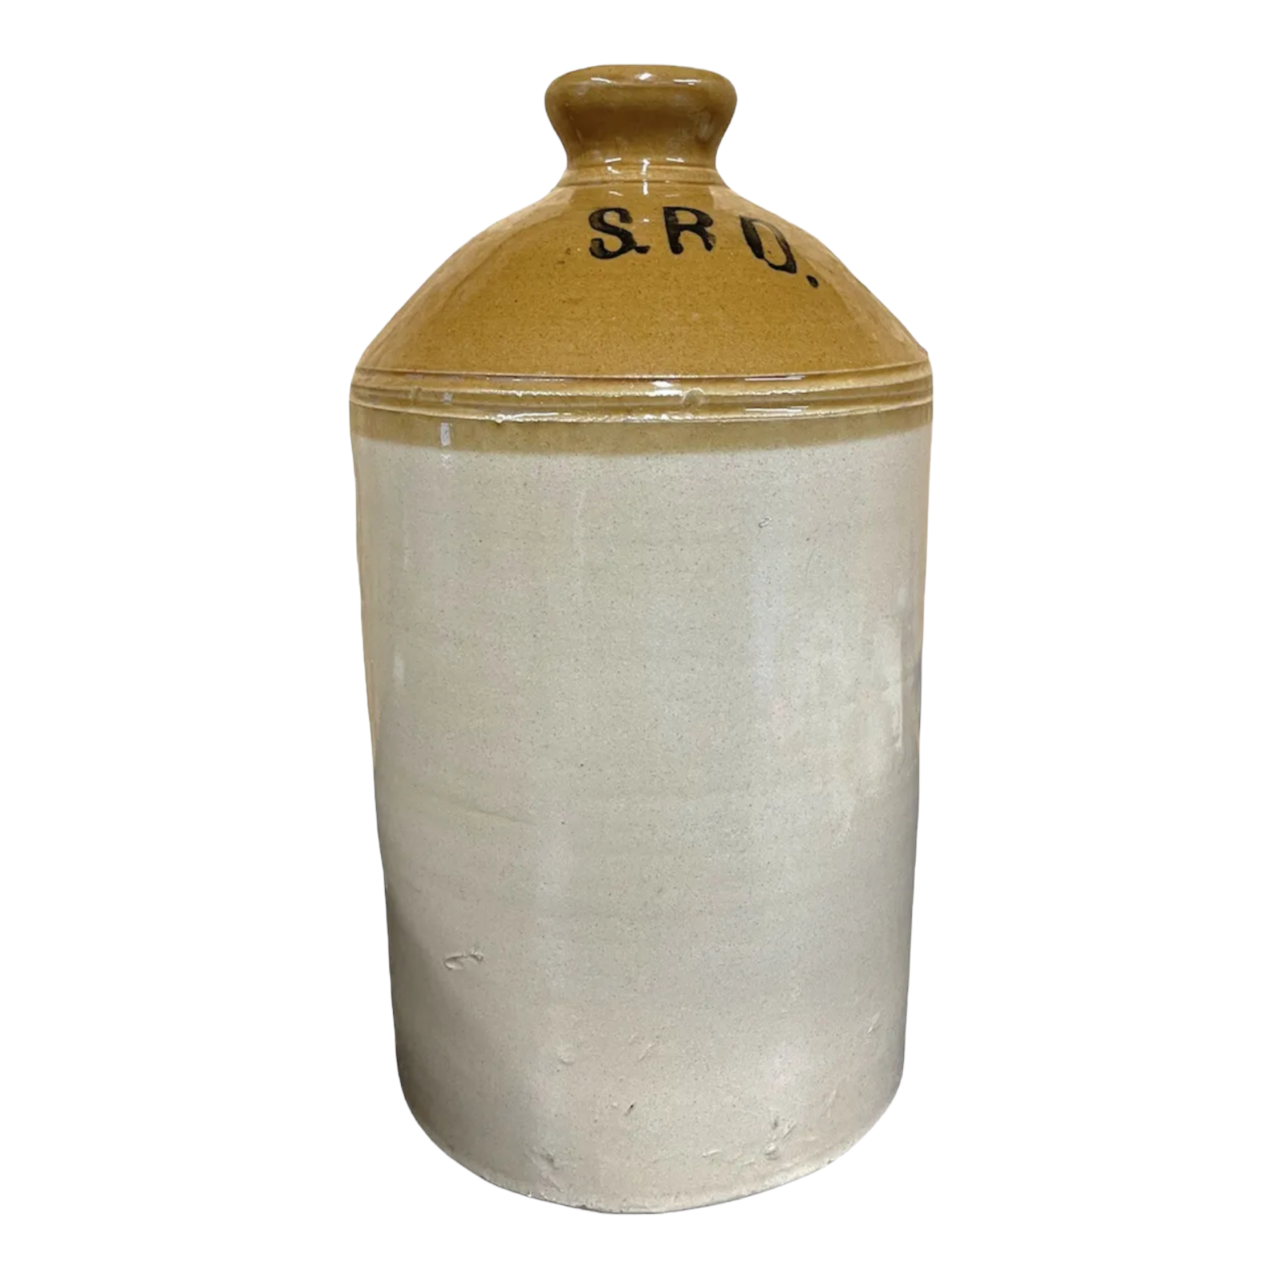 WW1 British SRD jug sold by All Things French Store